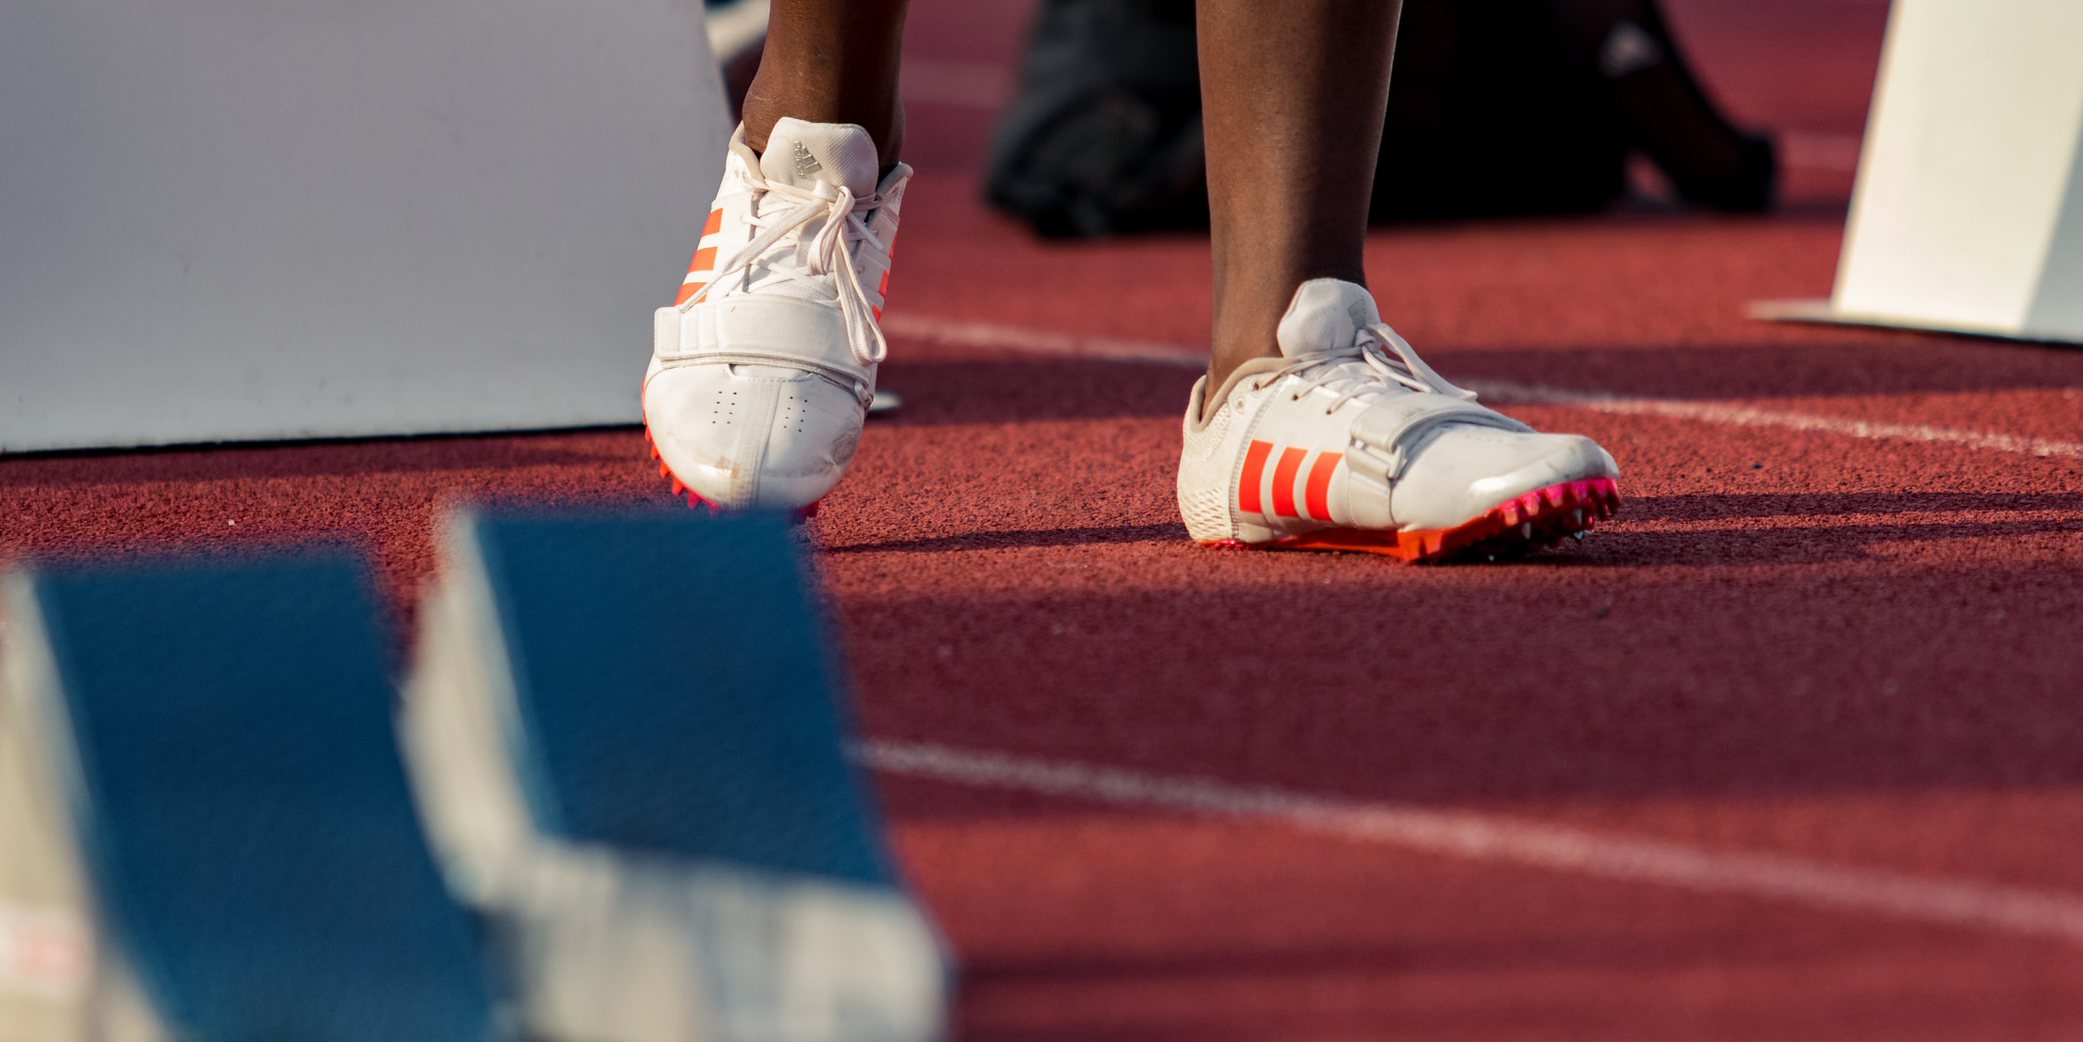 An athlete's feet wearing running spikes on an athletics track